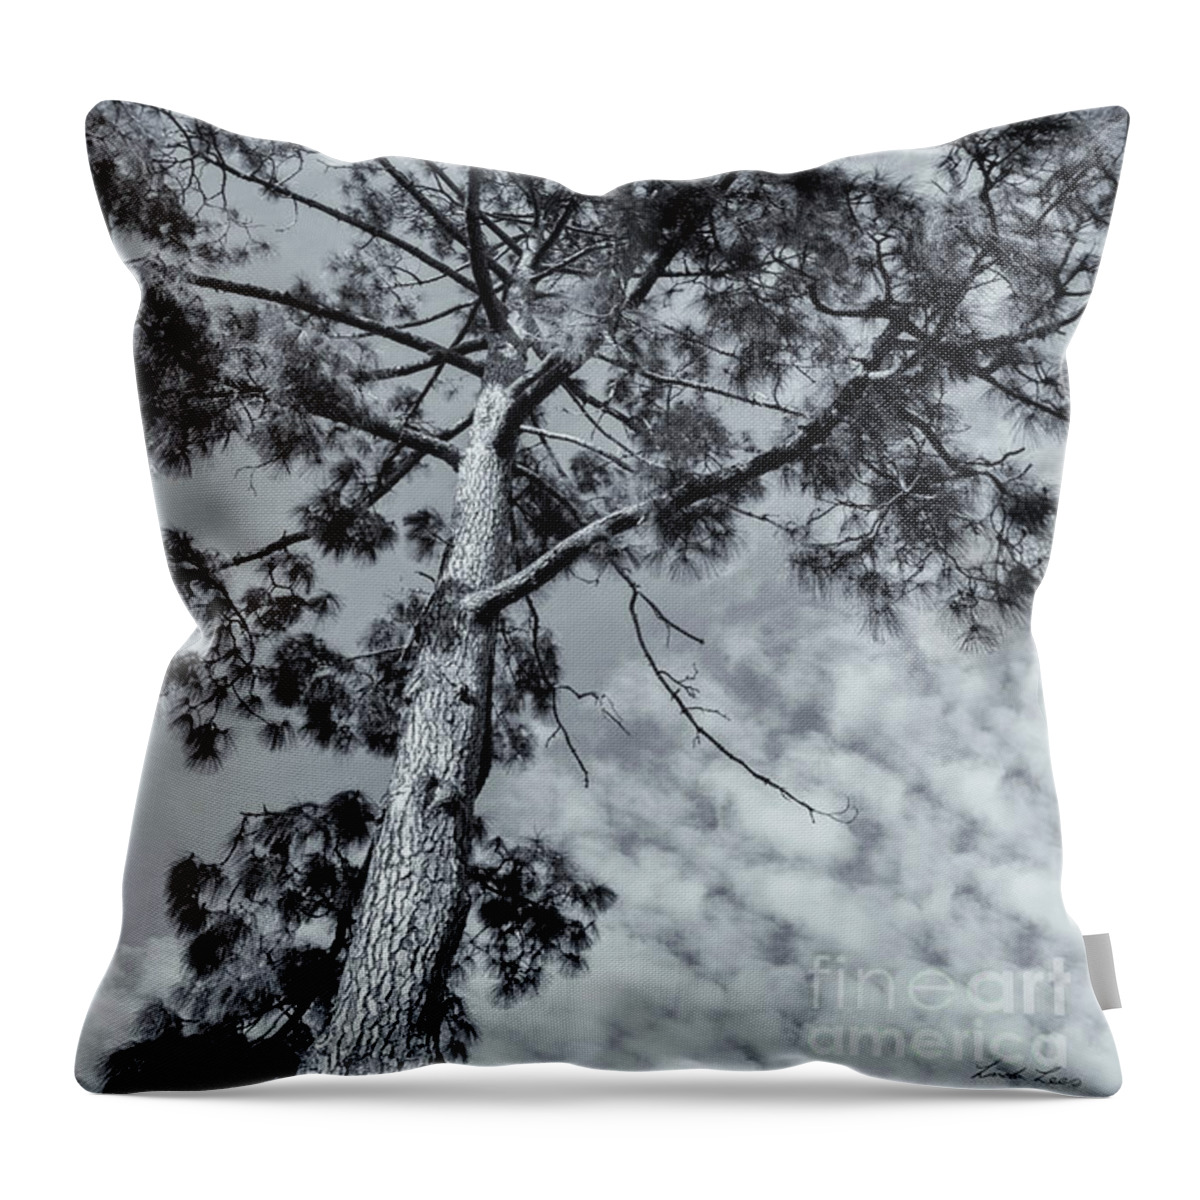 Tree Throw Pillow featuring the photograph Towering by Linda Lees